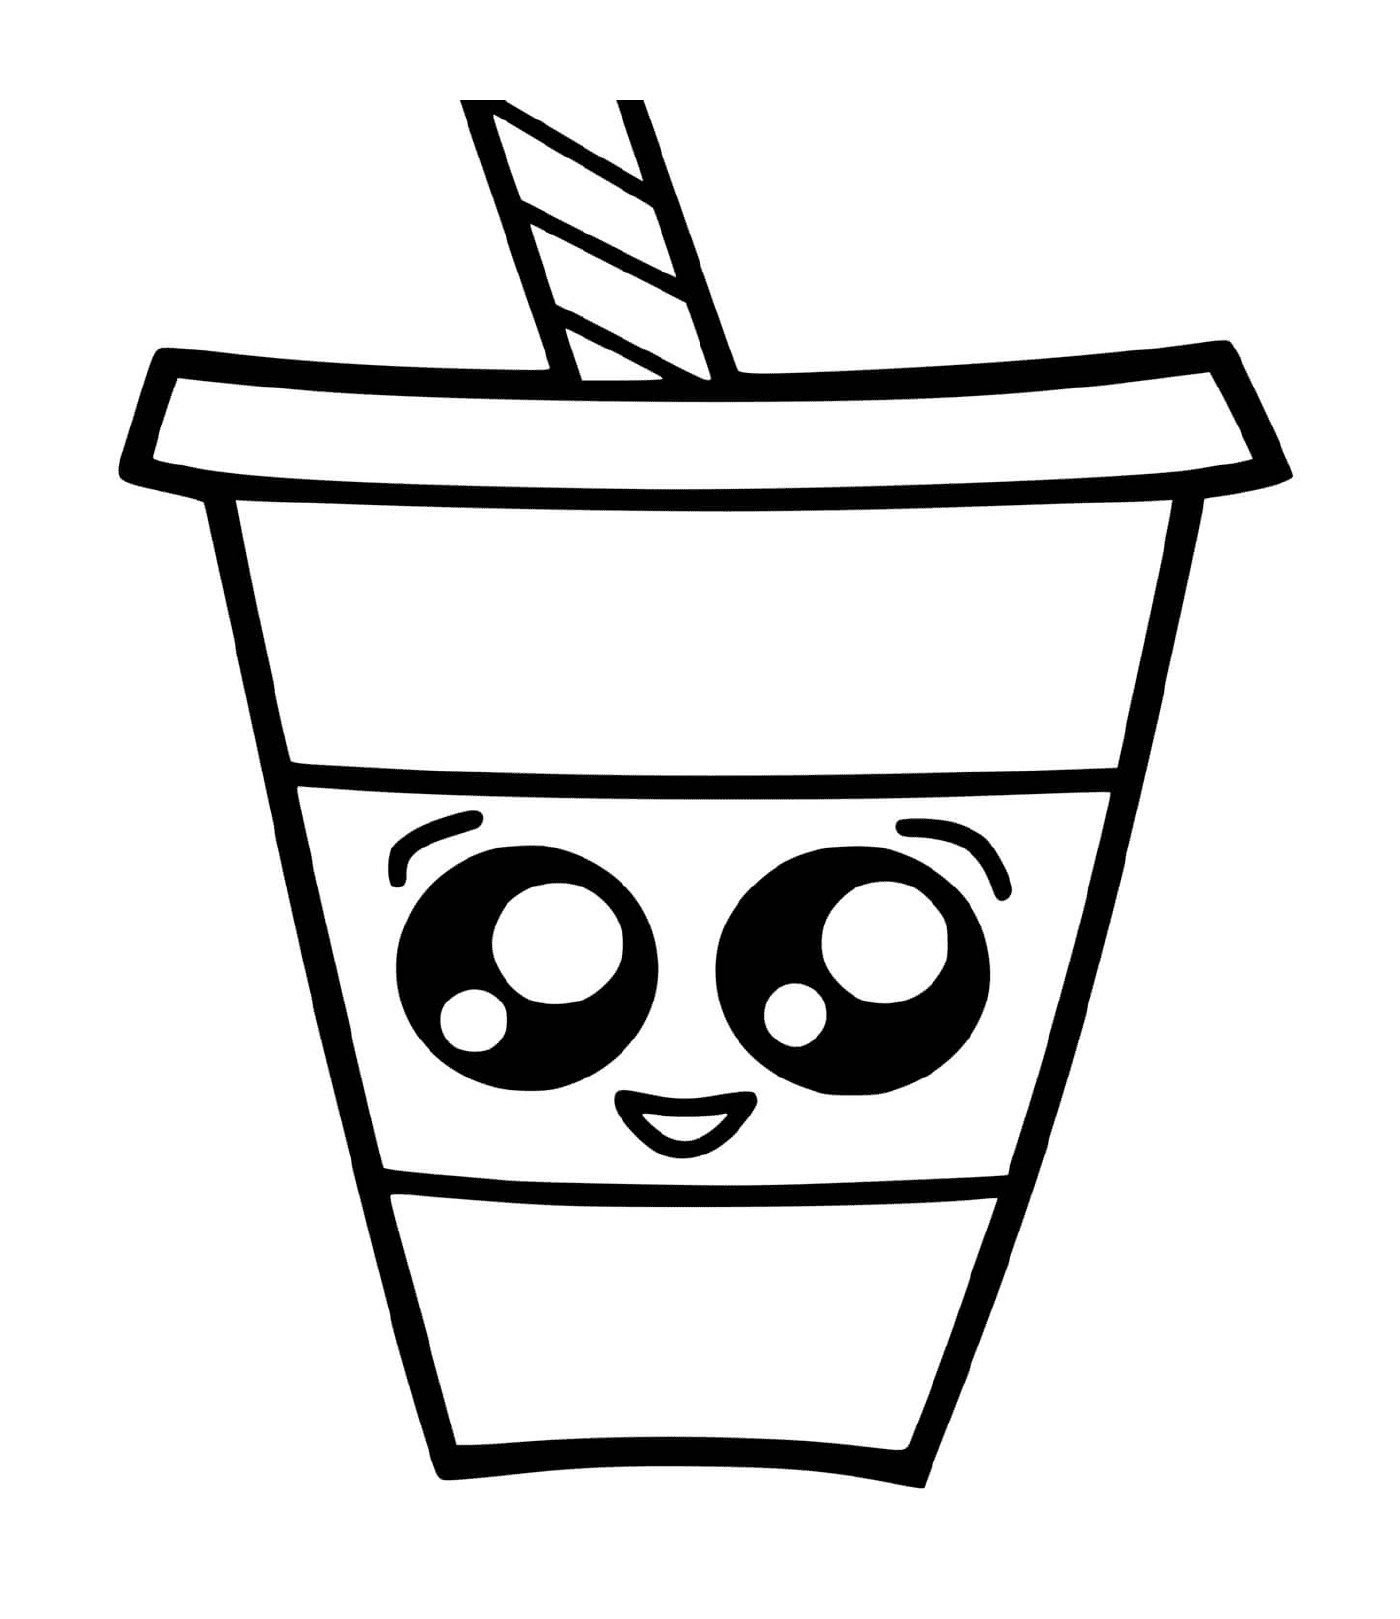  A cup with a straw 